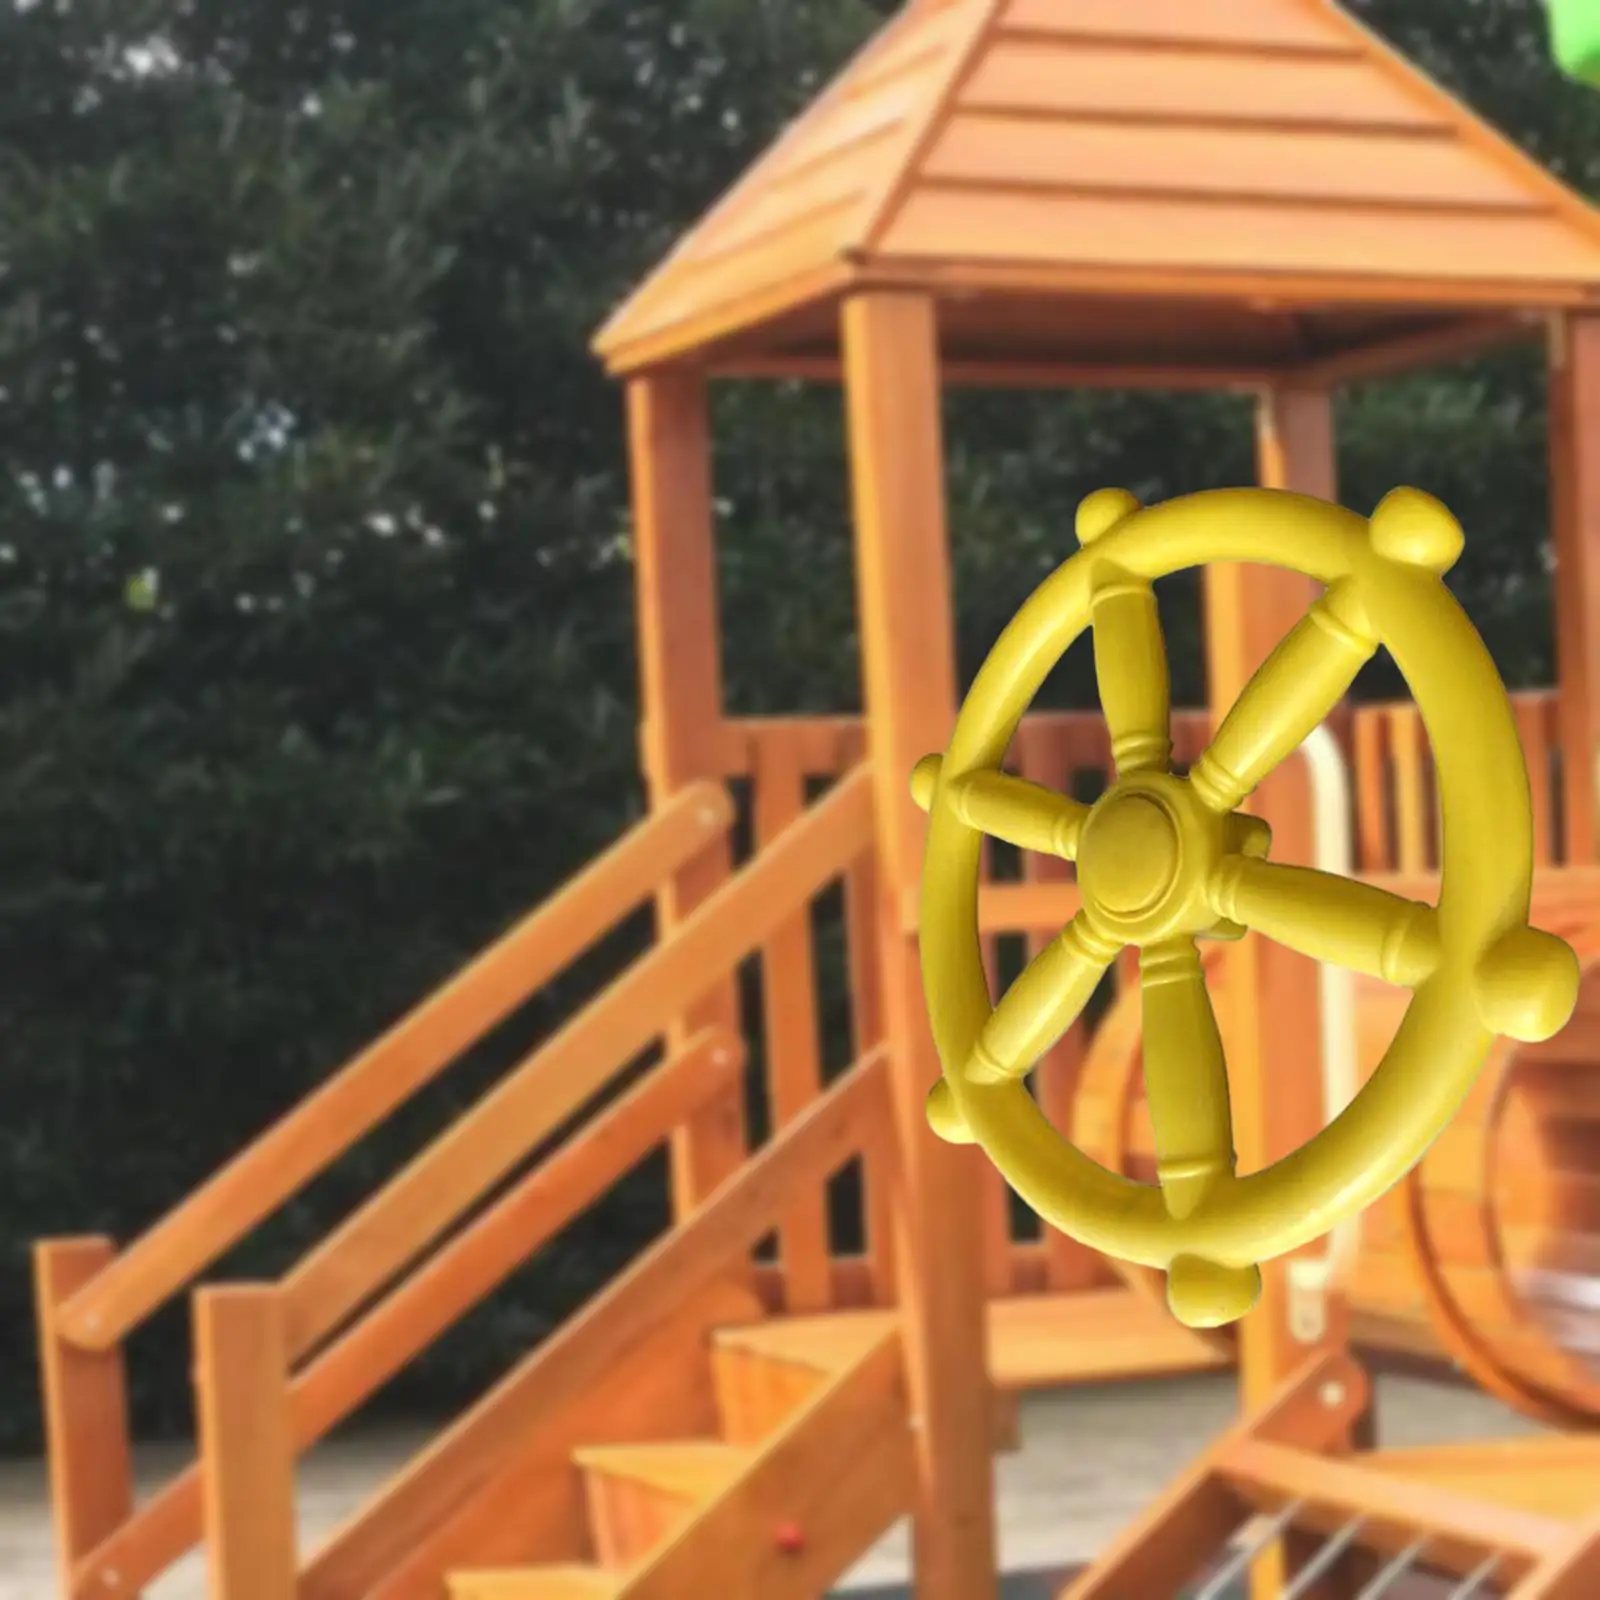 Pirate Ship Wheel with Screws Multipurpose Props Kids Steering Wheel Toy for Garden Play House Amusement Park Treehouse